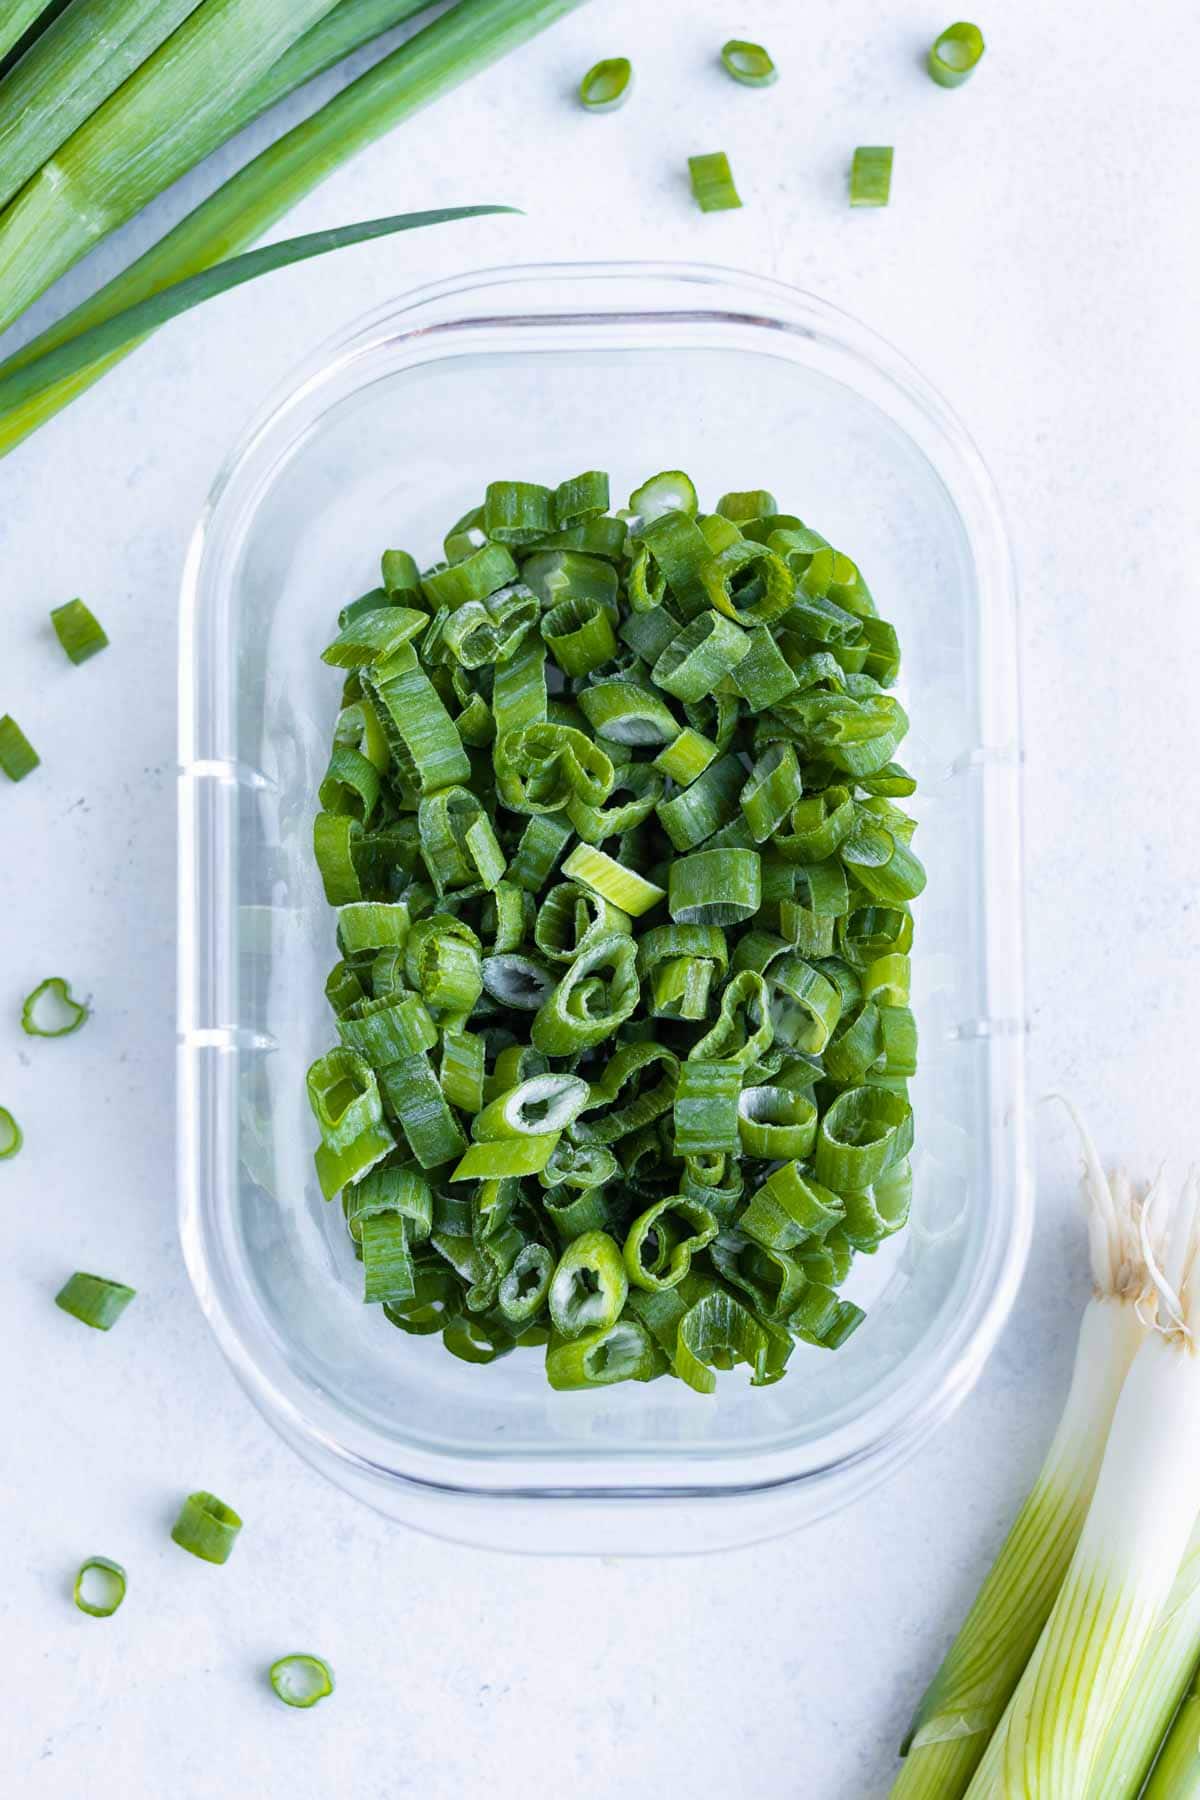 How much Sliced Green Onions, With or Without Tops, are in a Bunch?